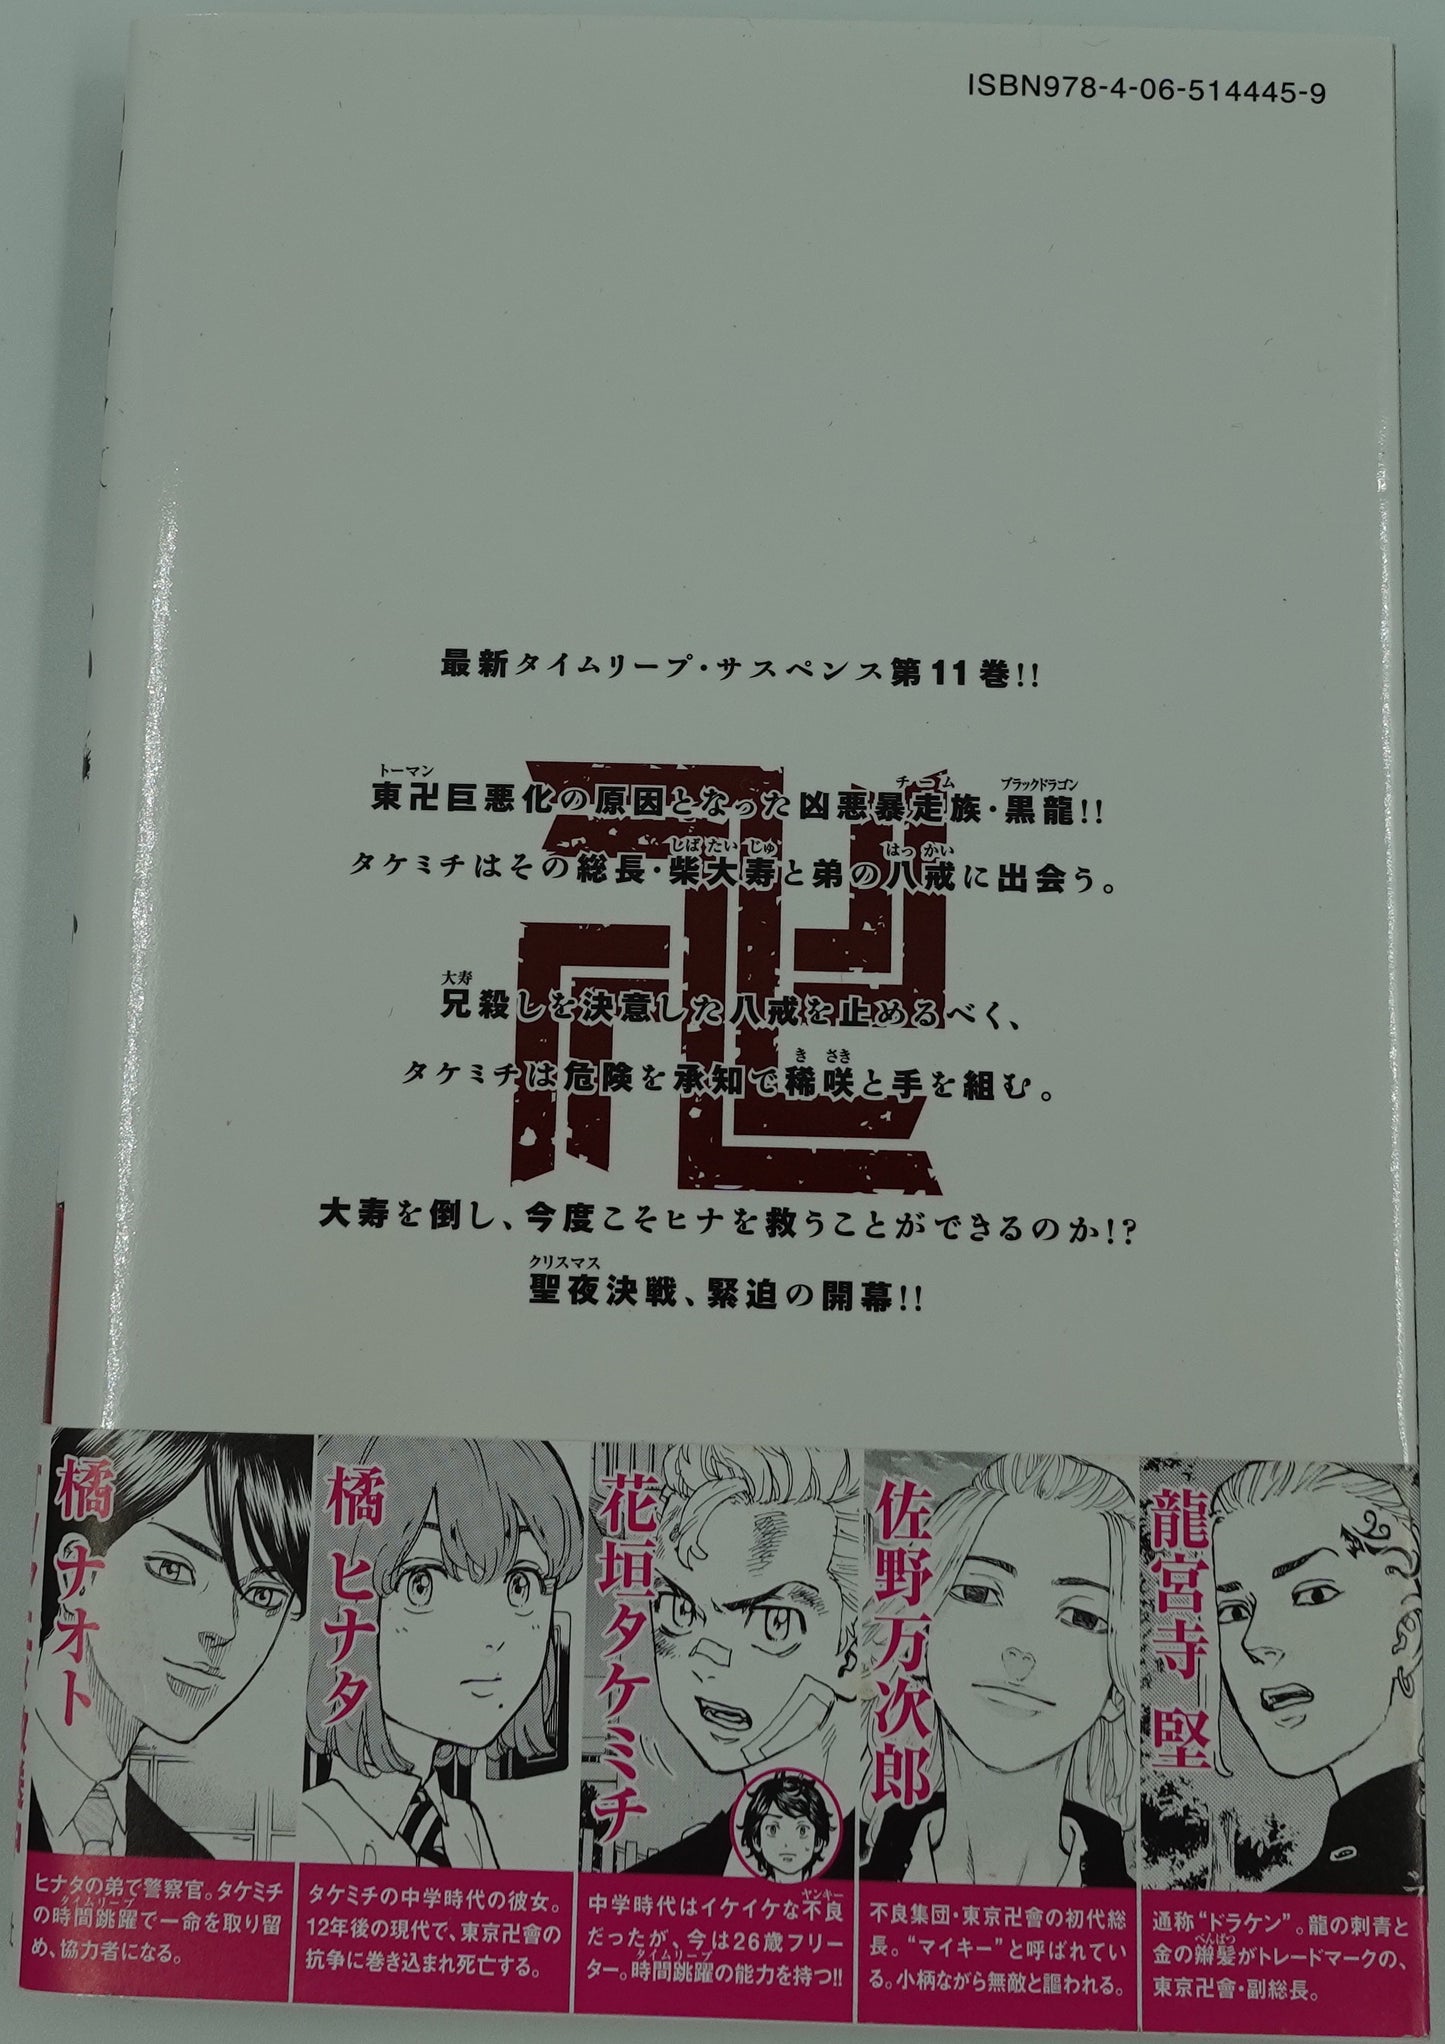 Tokyo Revengers Vol.11- Official Japanese Edition